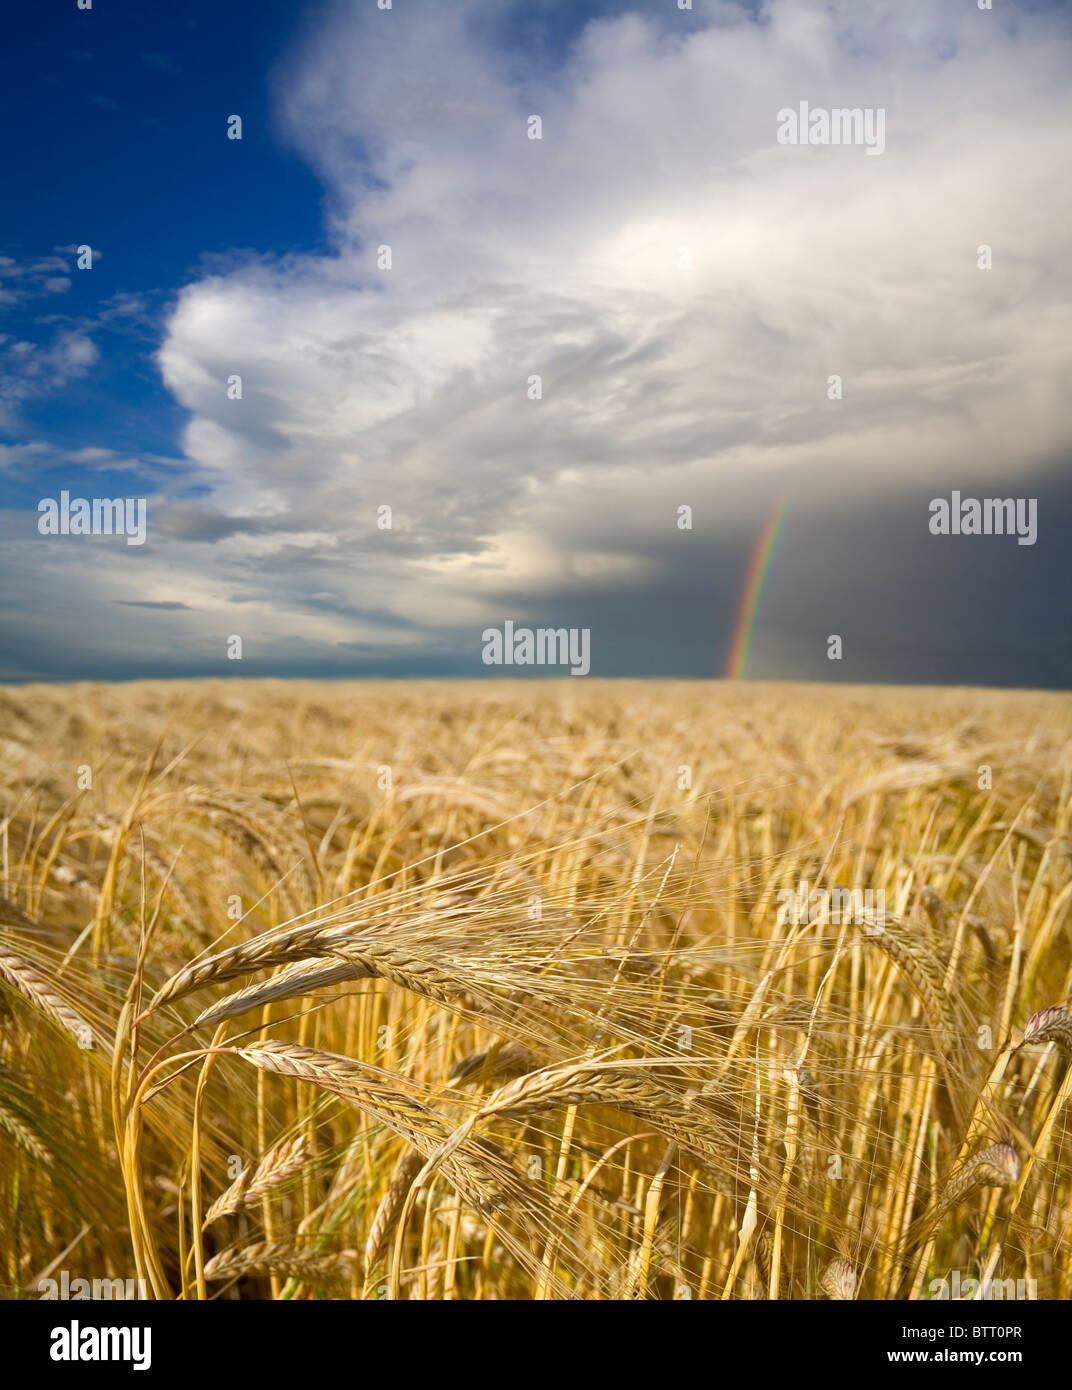 A field of ripening barley sits beneath a rainbow, offering hope for the future of agriculture. Stock Photo